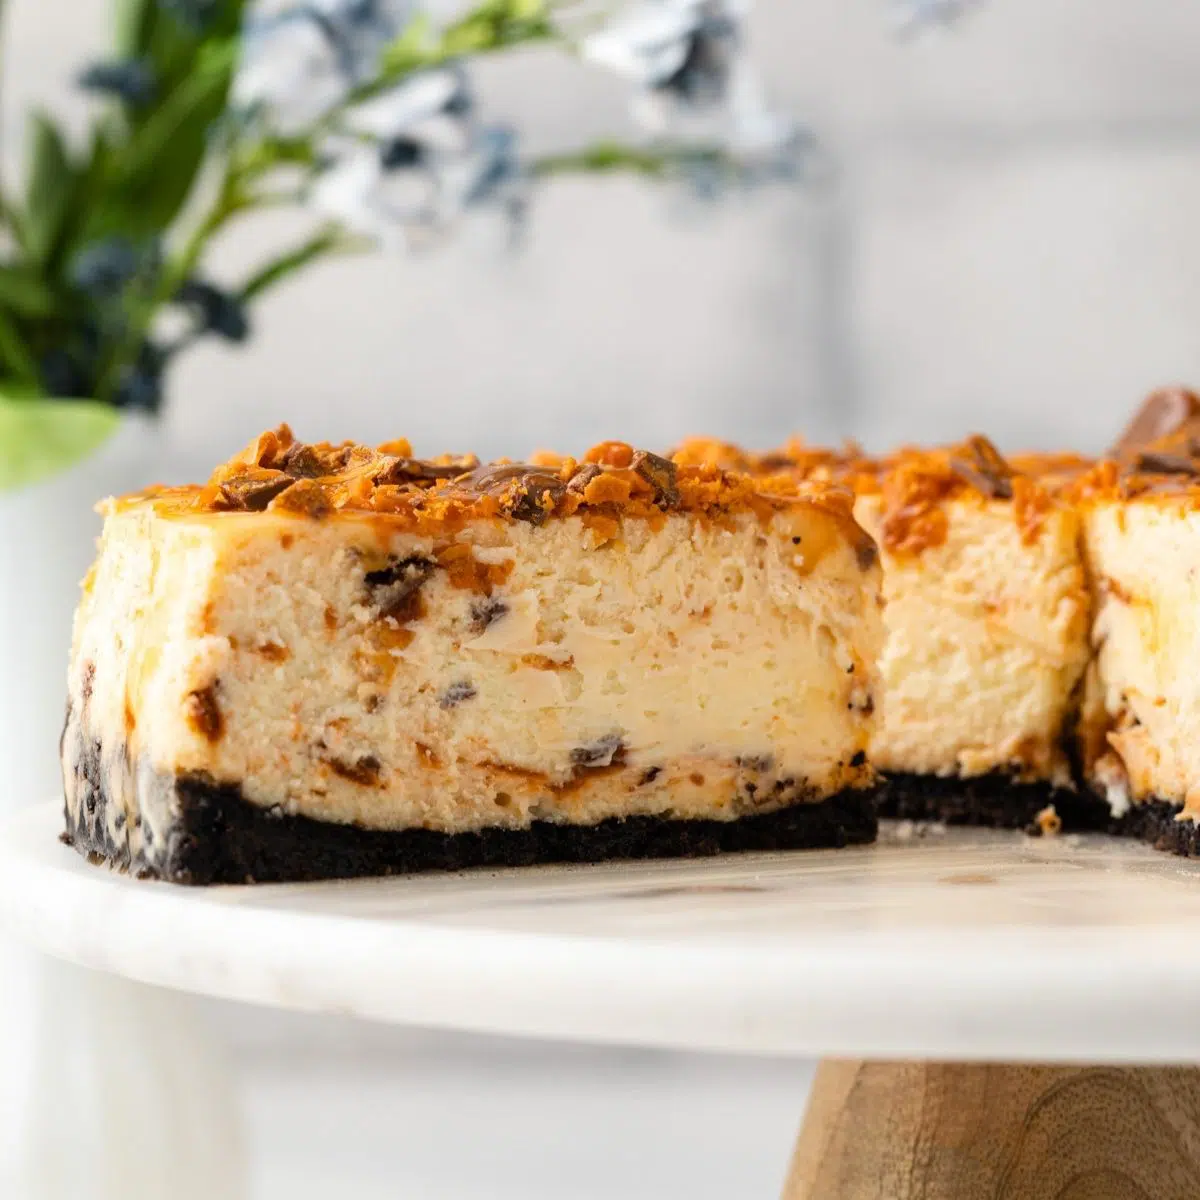 Butterfinger Cheesecake with Caramel Drizzle